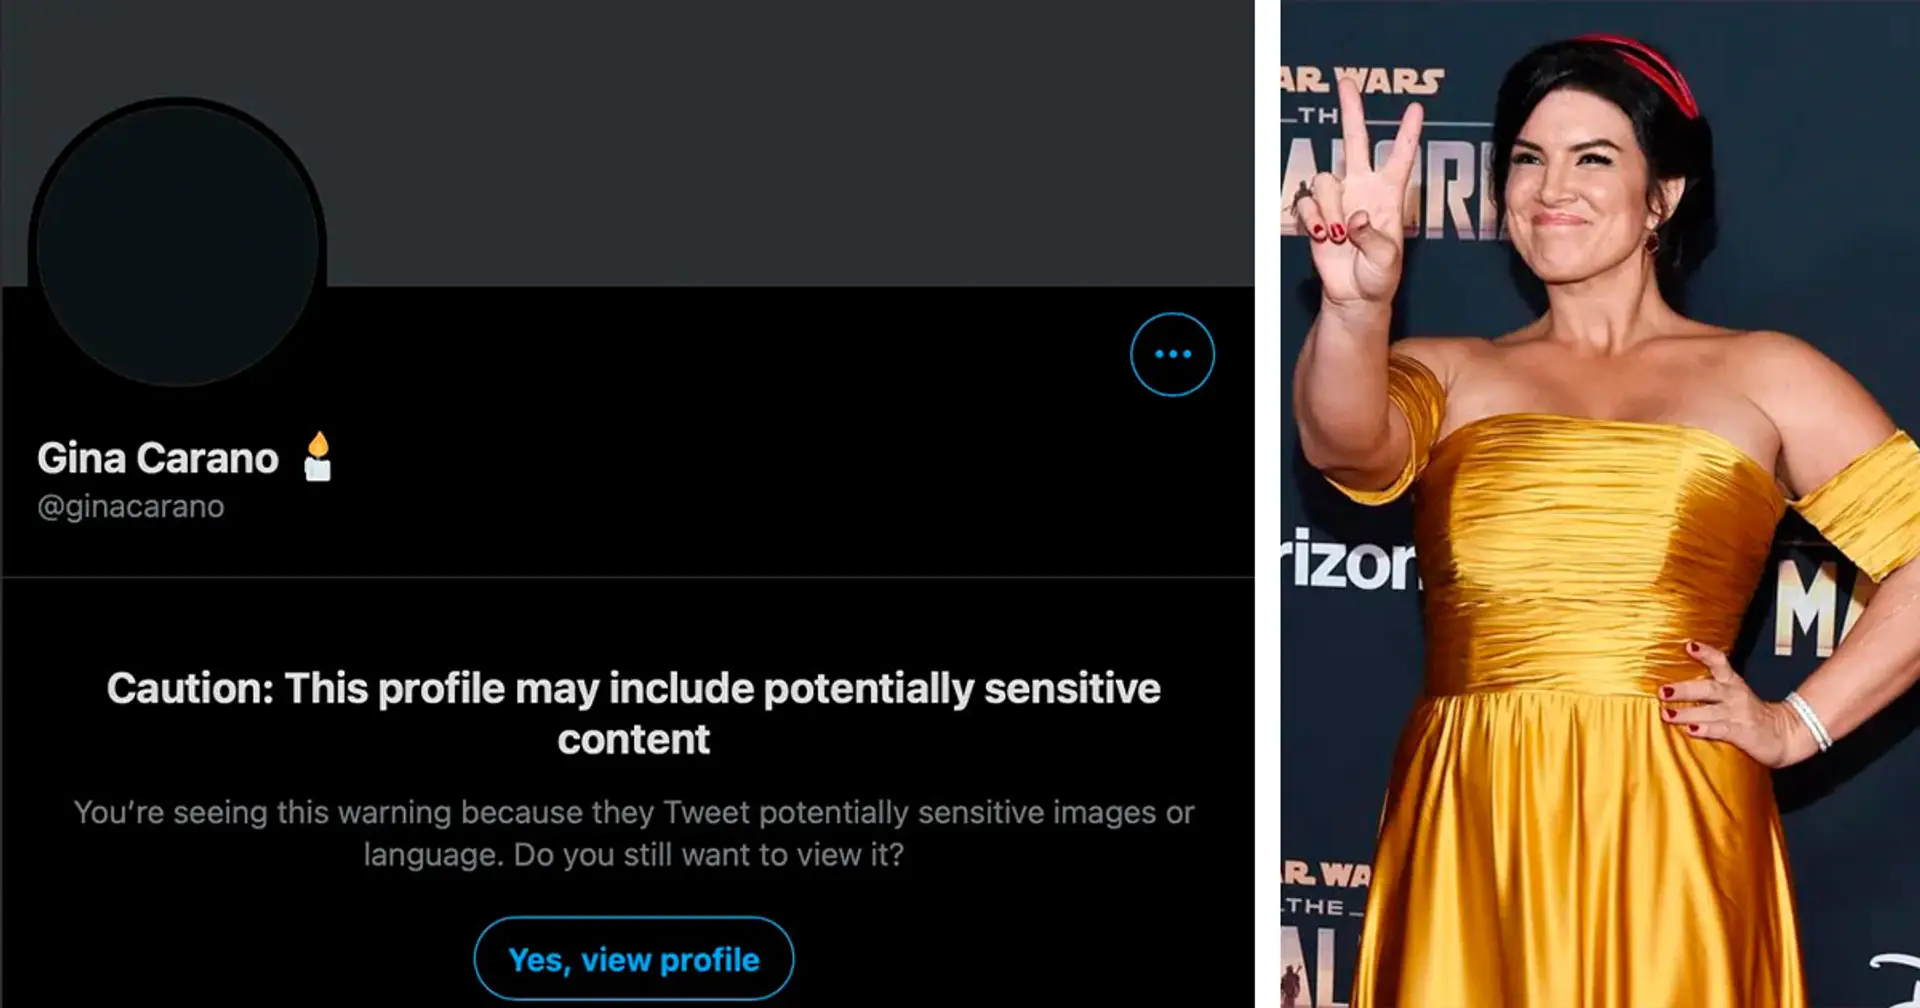 Fired from The Mandalorian, Gina Carano now gets her Twitter flagged for 'sensitive content'